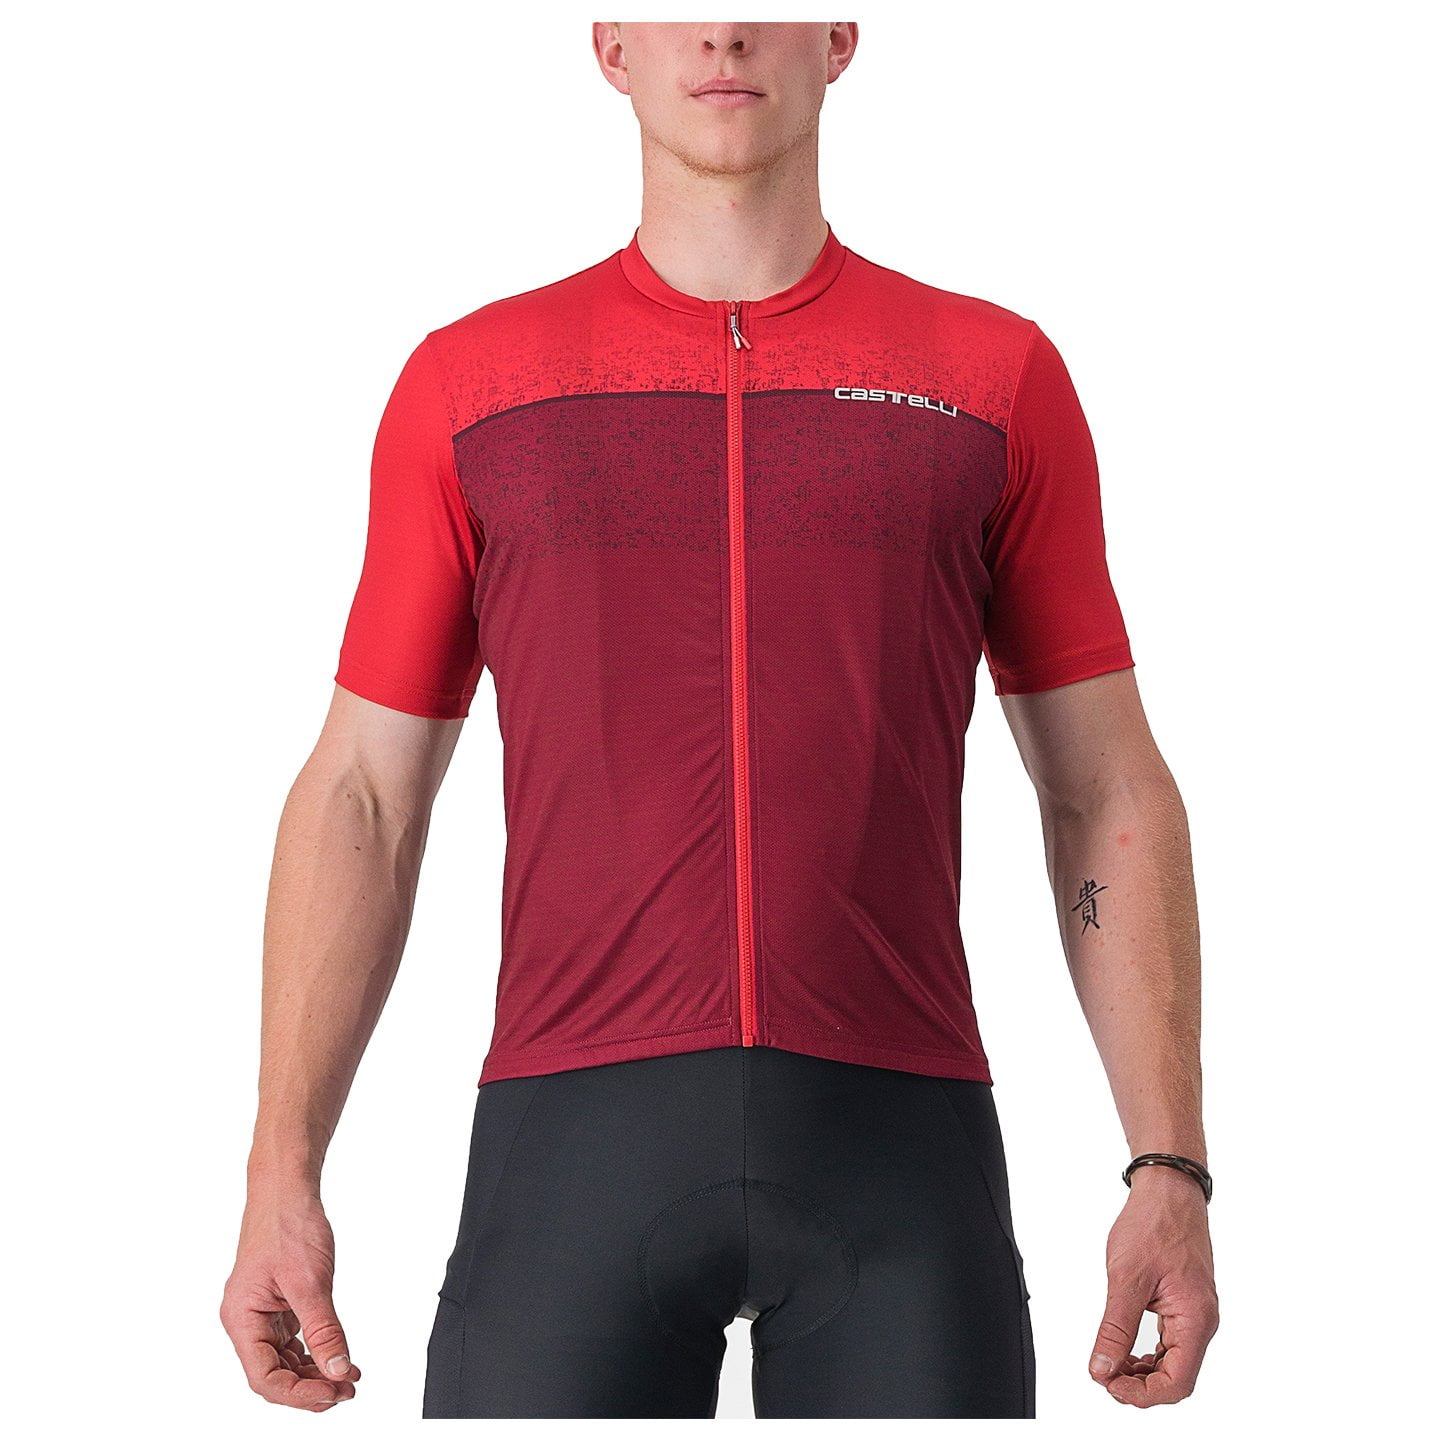 CASTELLI Unlimited Entrata Short Sleeve Jersey Short Sleeve Jersey, for men, size M, Cycling jersey, Cycling clothing